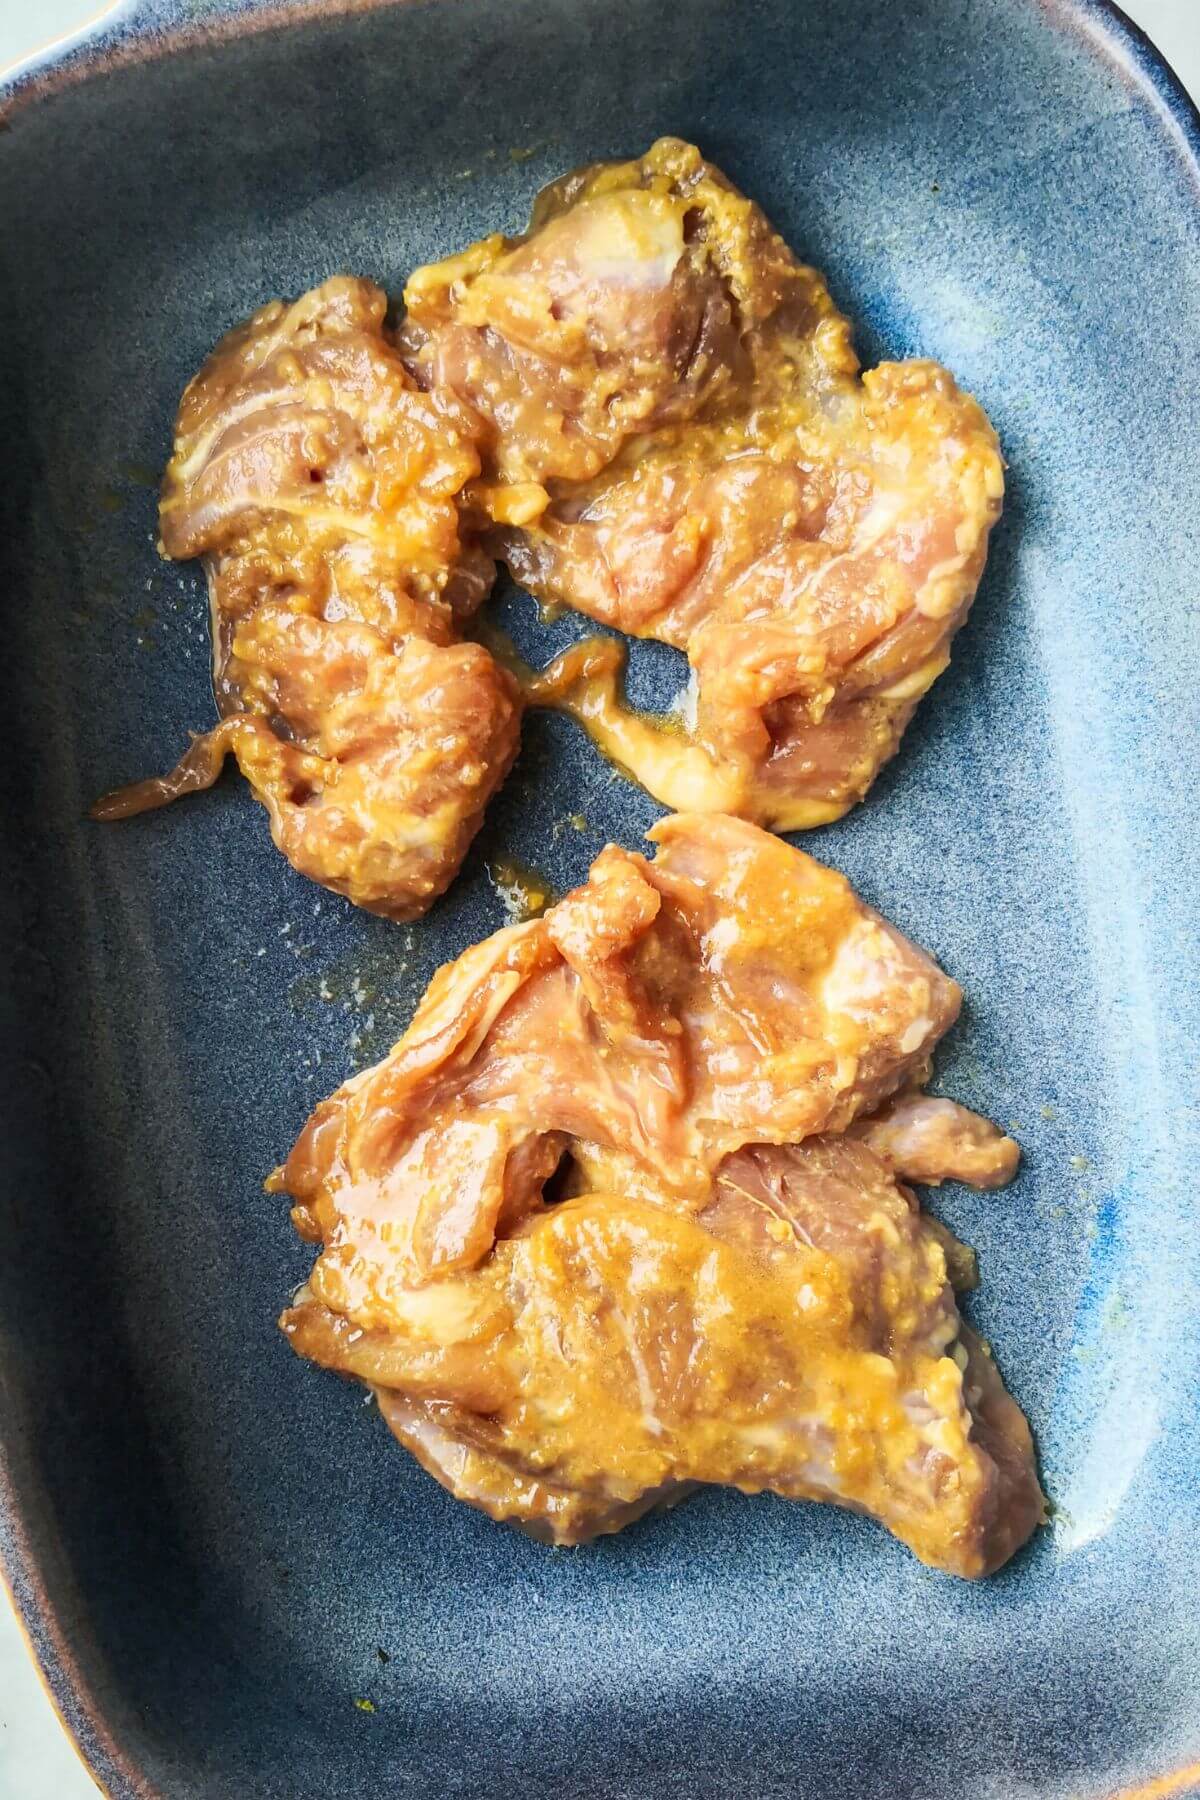 Raw miso marinated chicken thighs in a small blue oven dish.